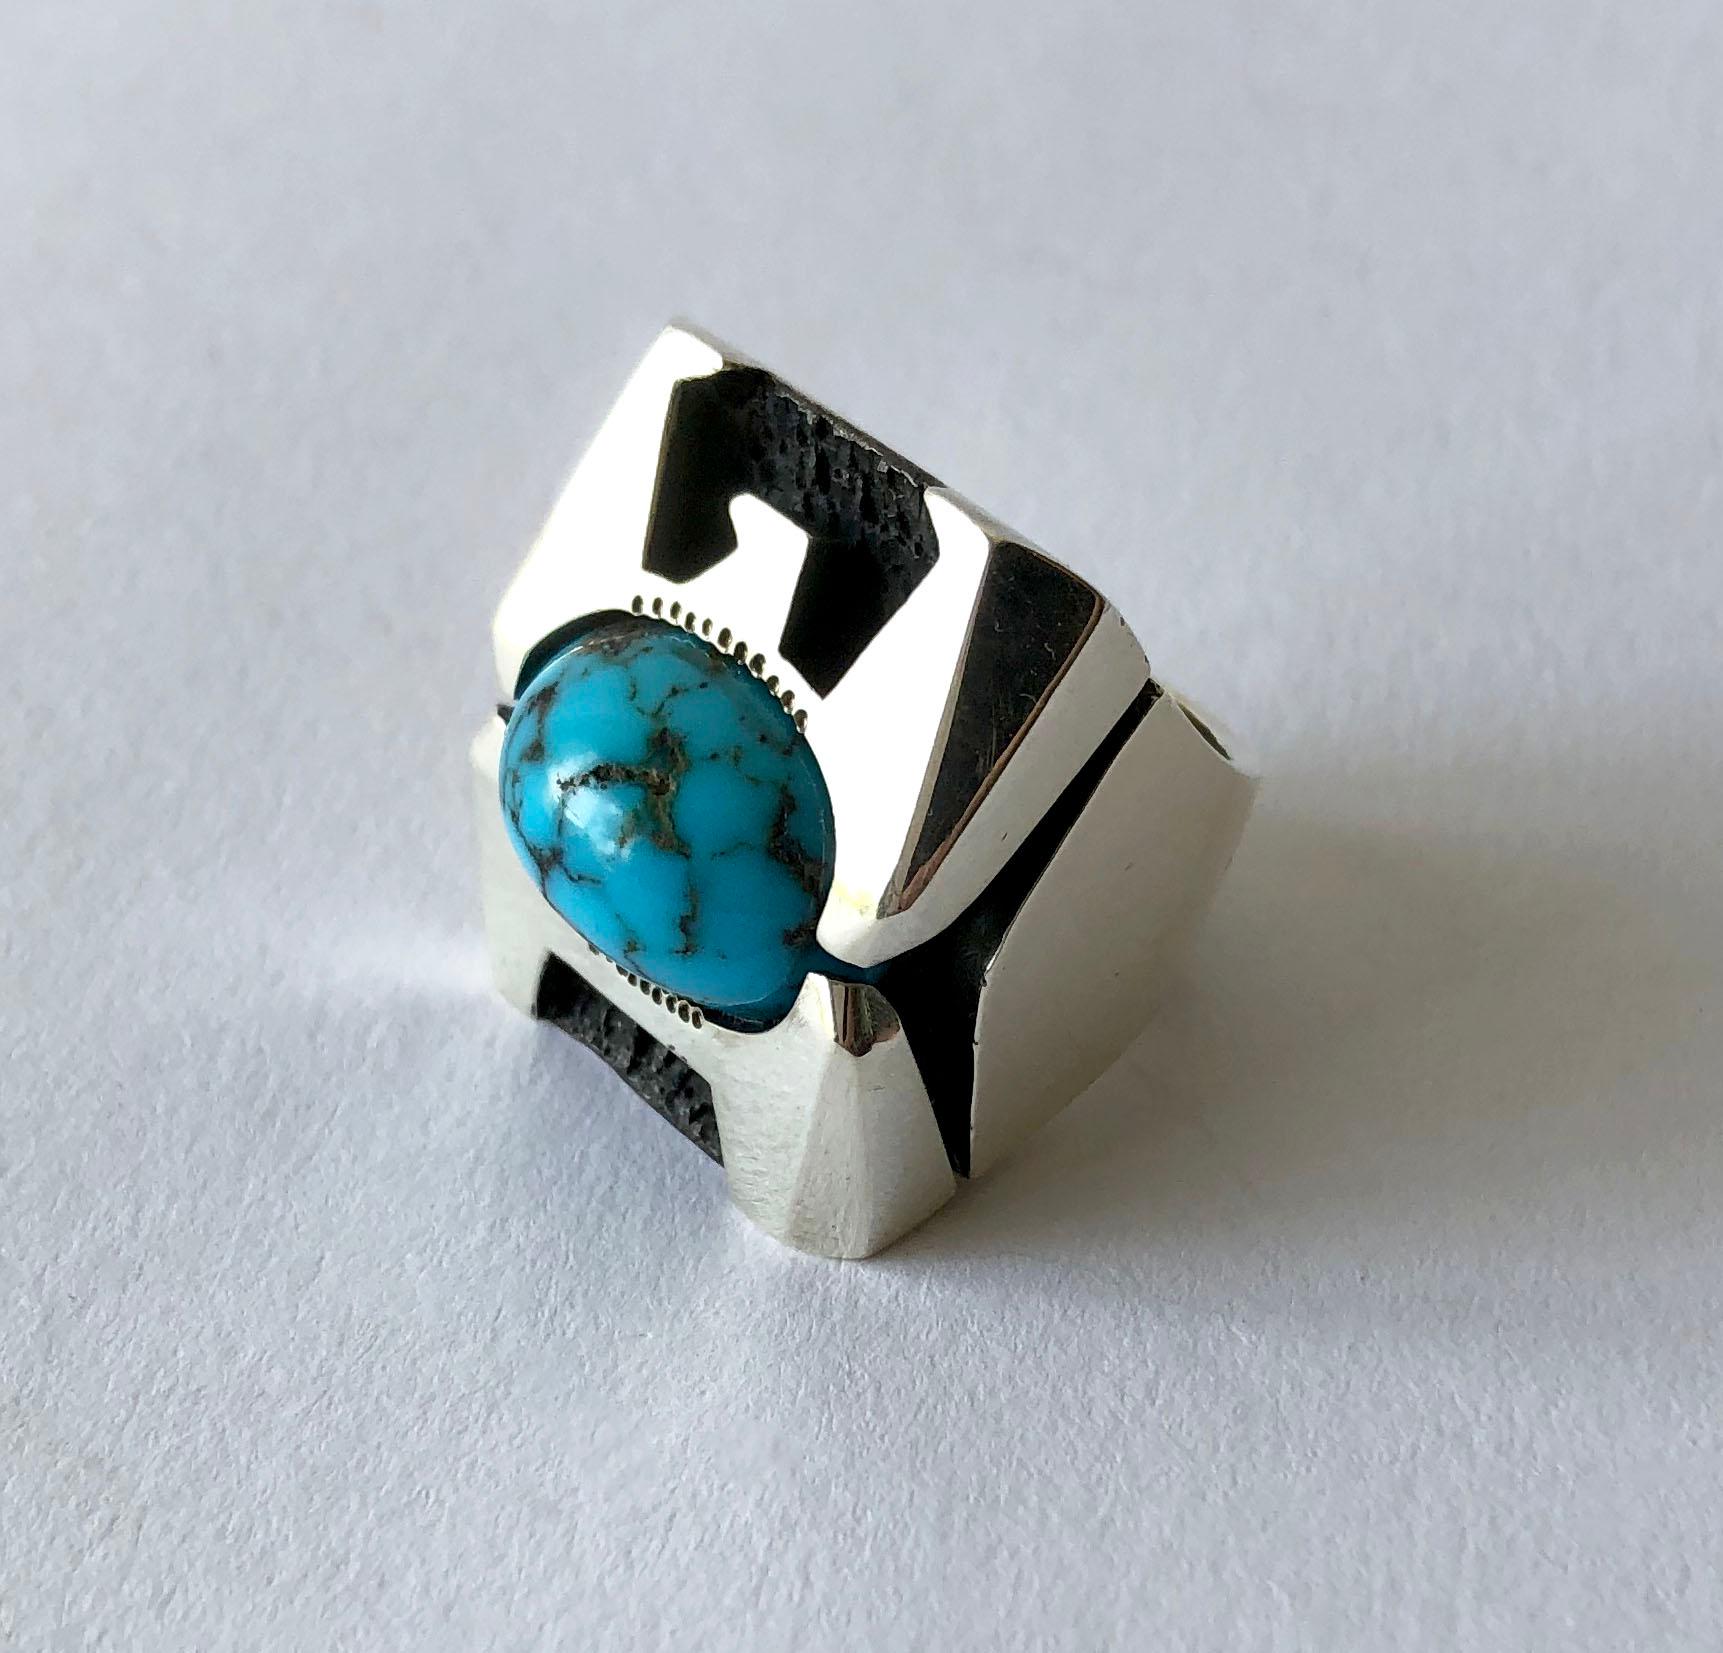 Faceted sterling silver Thunderbird ring with centered turquoise, created by Raymond Graves of Scottsdale, Arizona.  The Thunderbird is considered a spiritual, supernatural being of power and protection.  Ring is heavy and large in scale measuring a